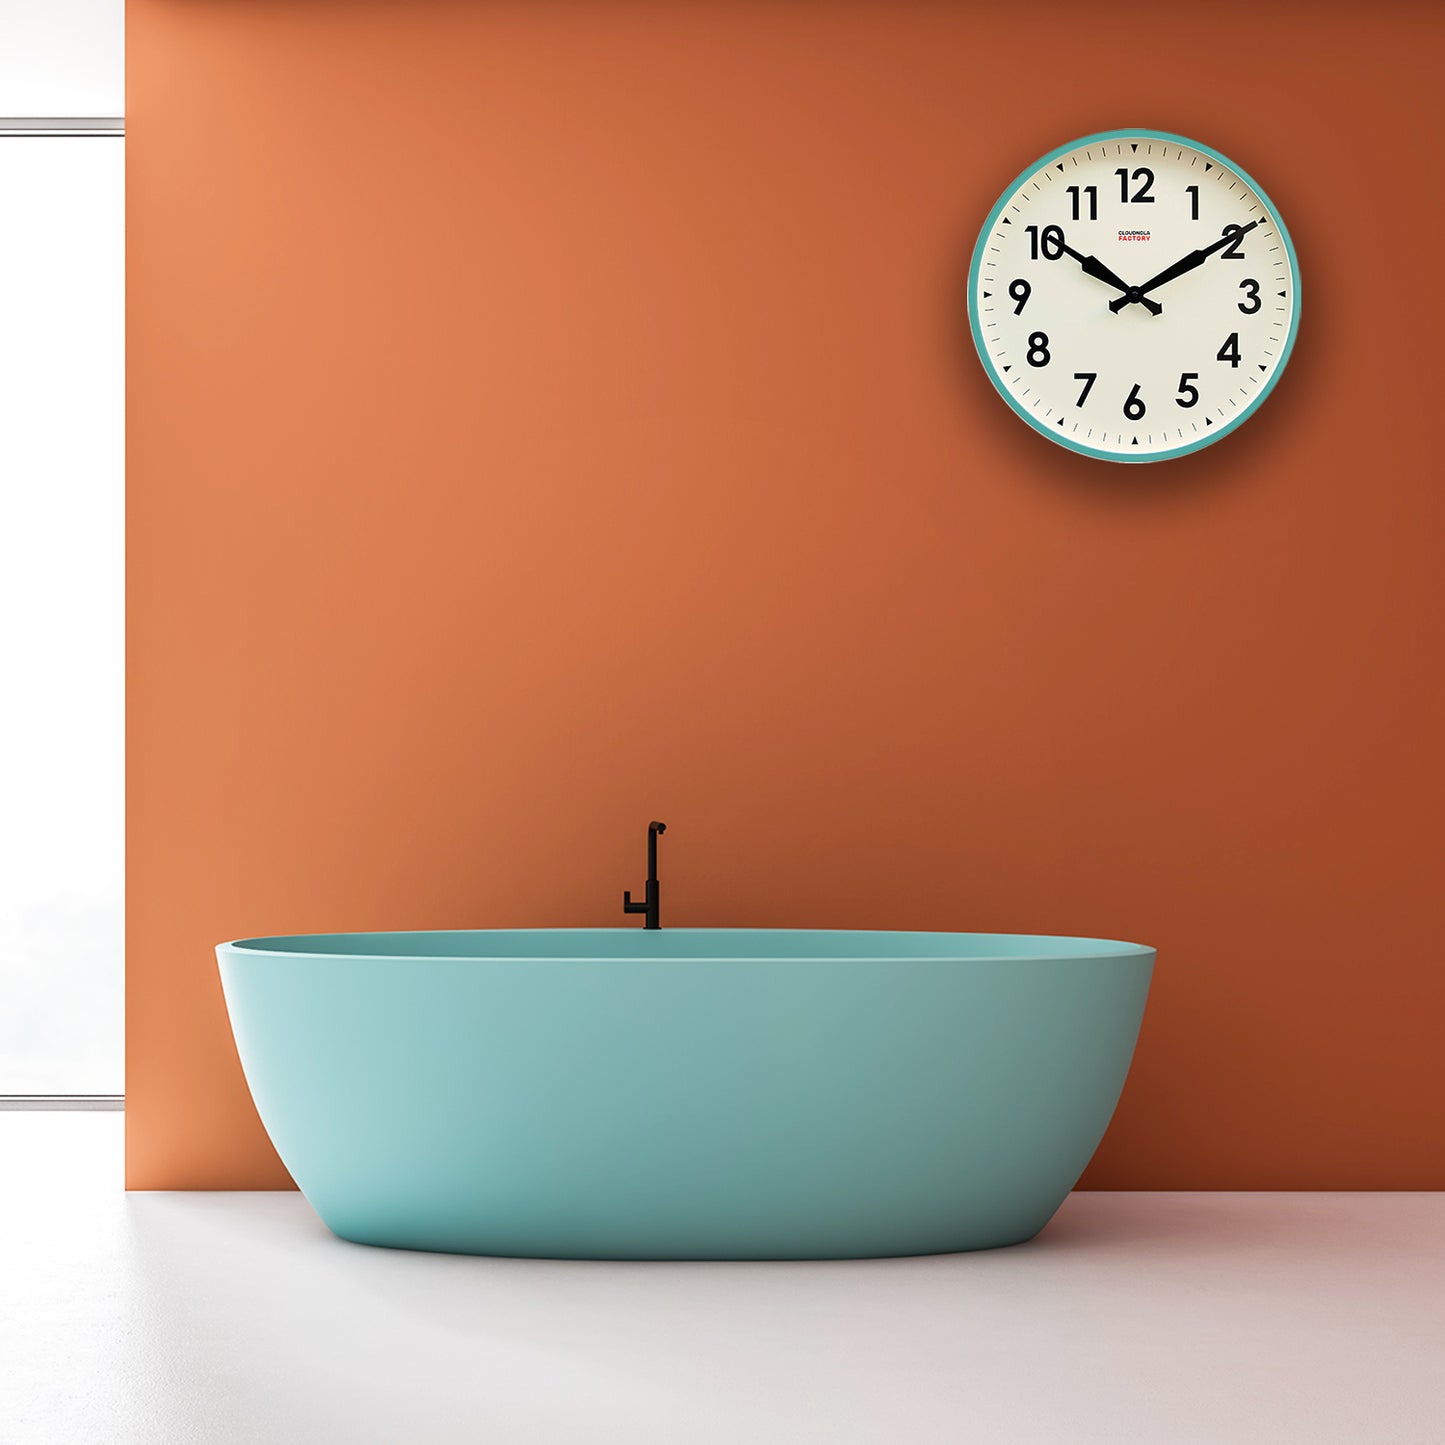 Factory XL Turquoise - Wall Clock - Silent - Steel Case